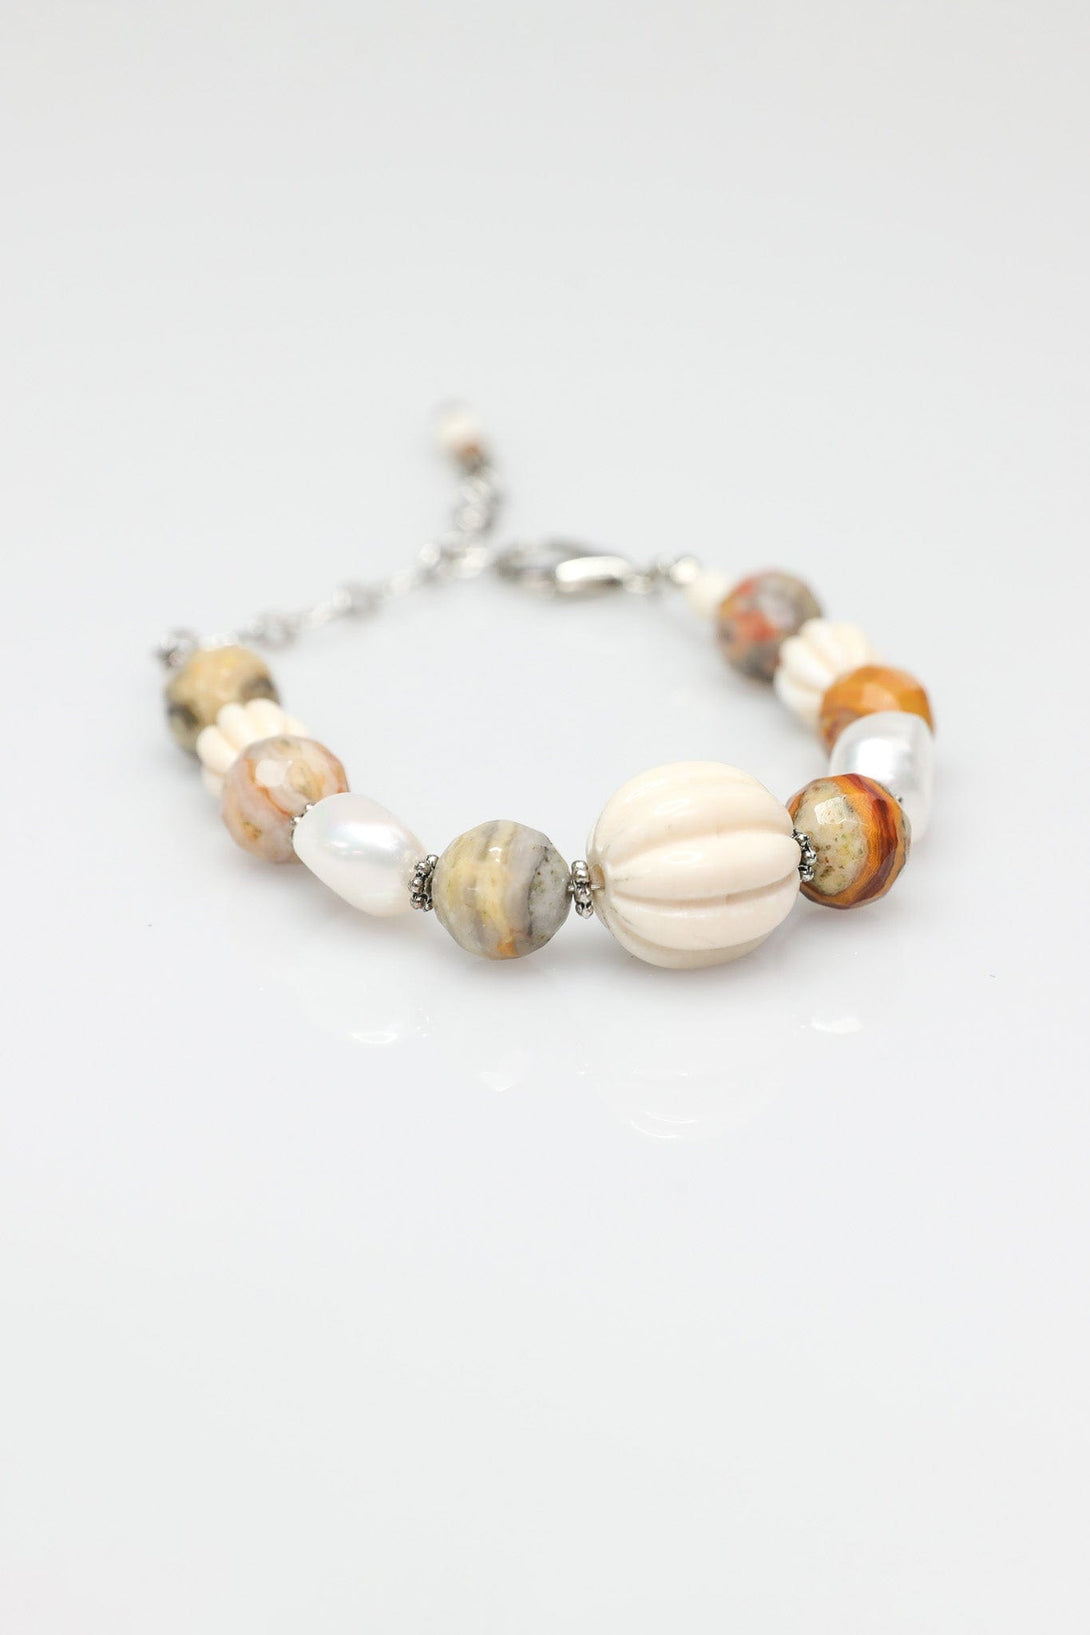 Bracelet in Cream with Neutral Accents